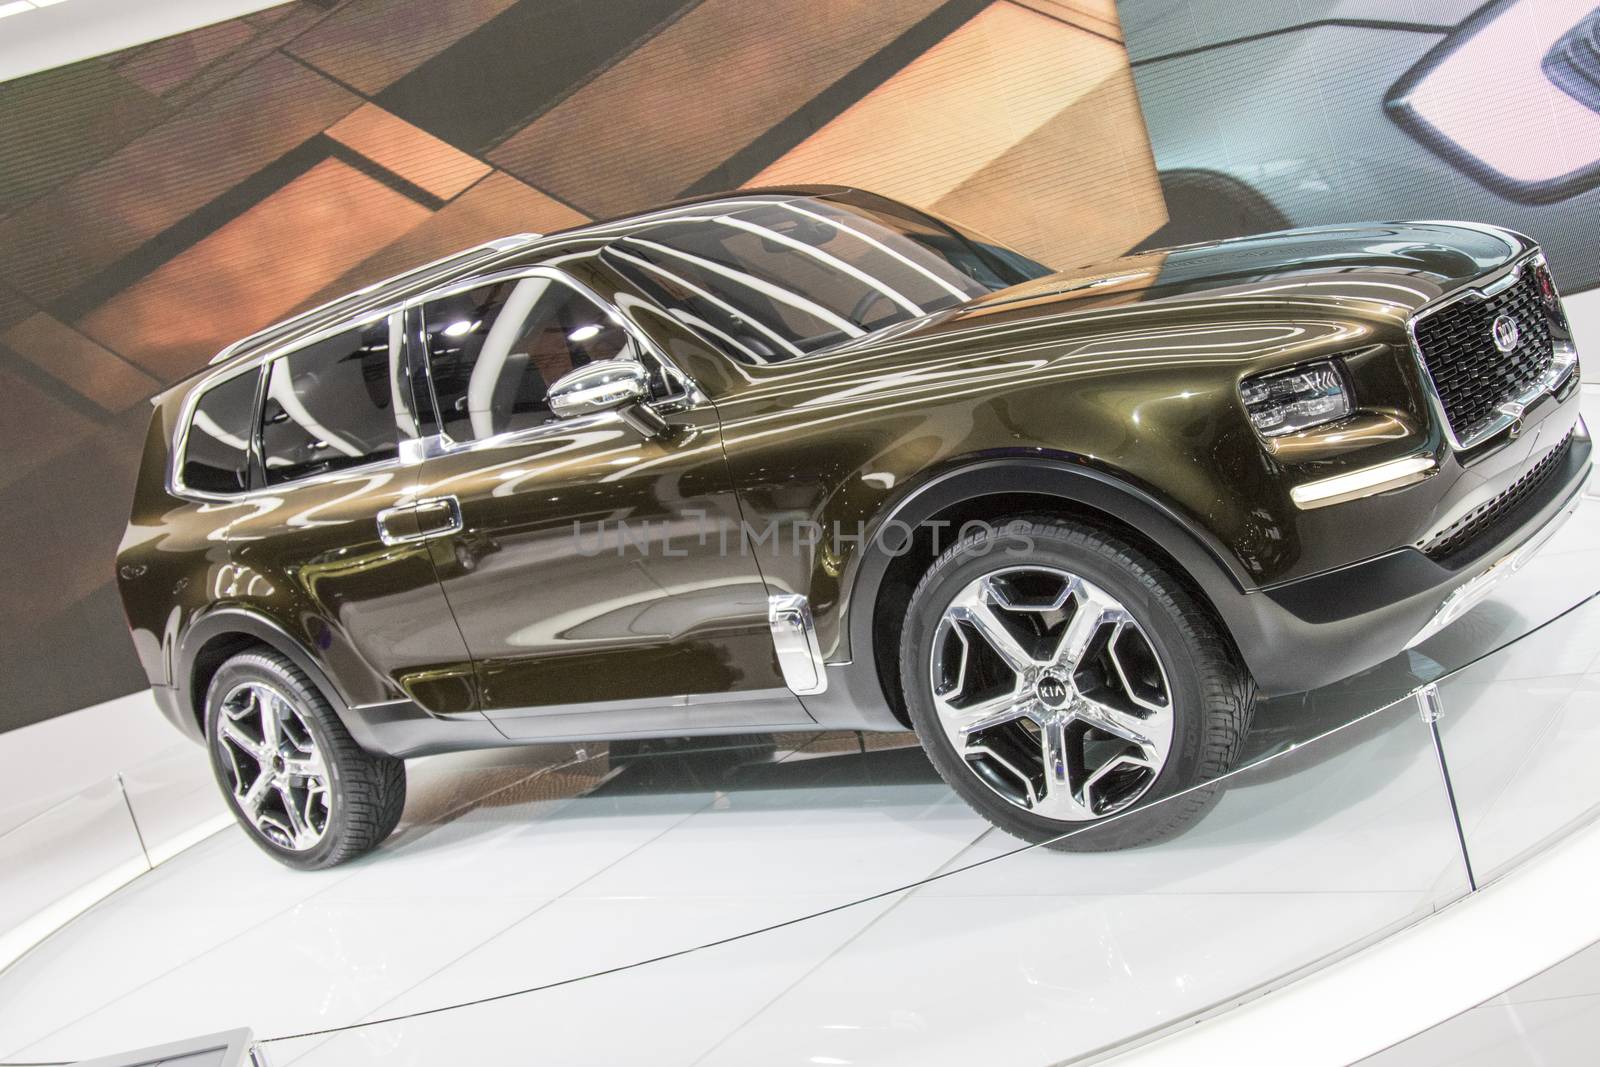 DETROIT - JANUARY 17 :The 2017 Kia Telluride concept at The Nort by snokid